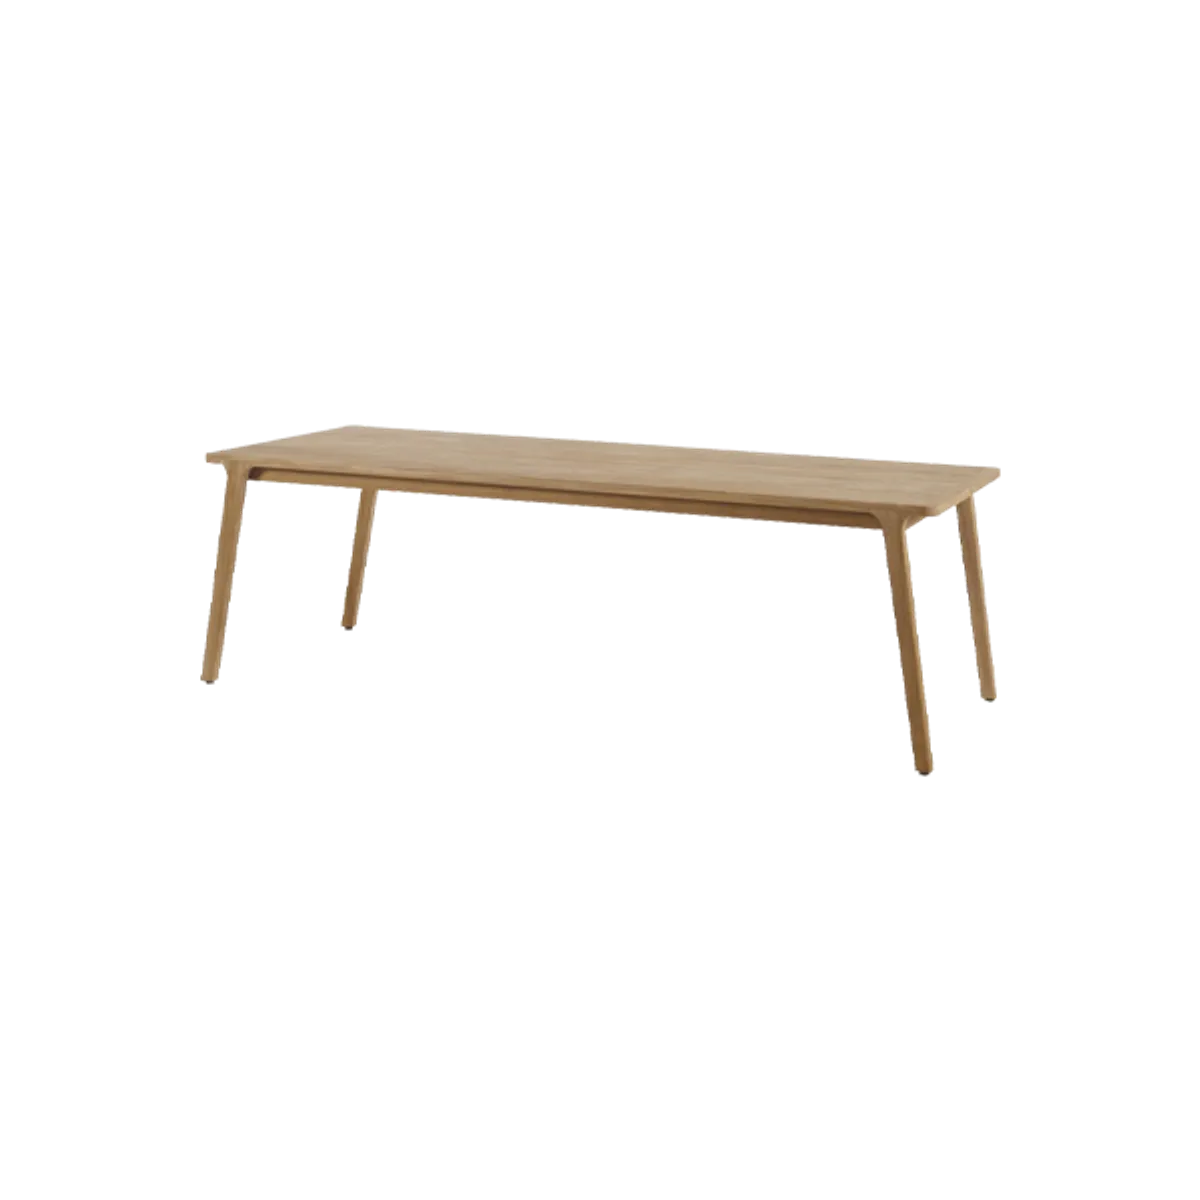 Carnelia large dining table Inside Out Contracts